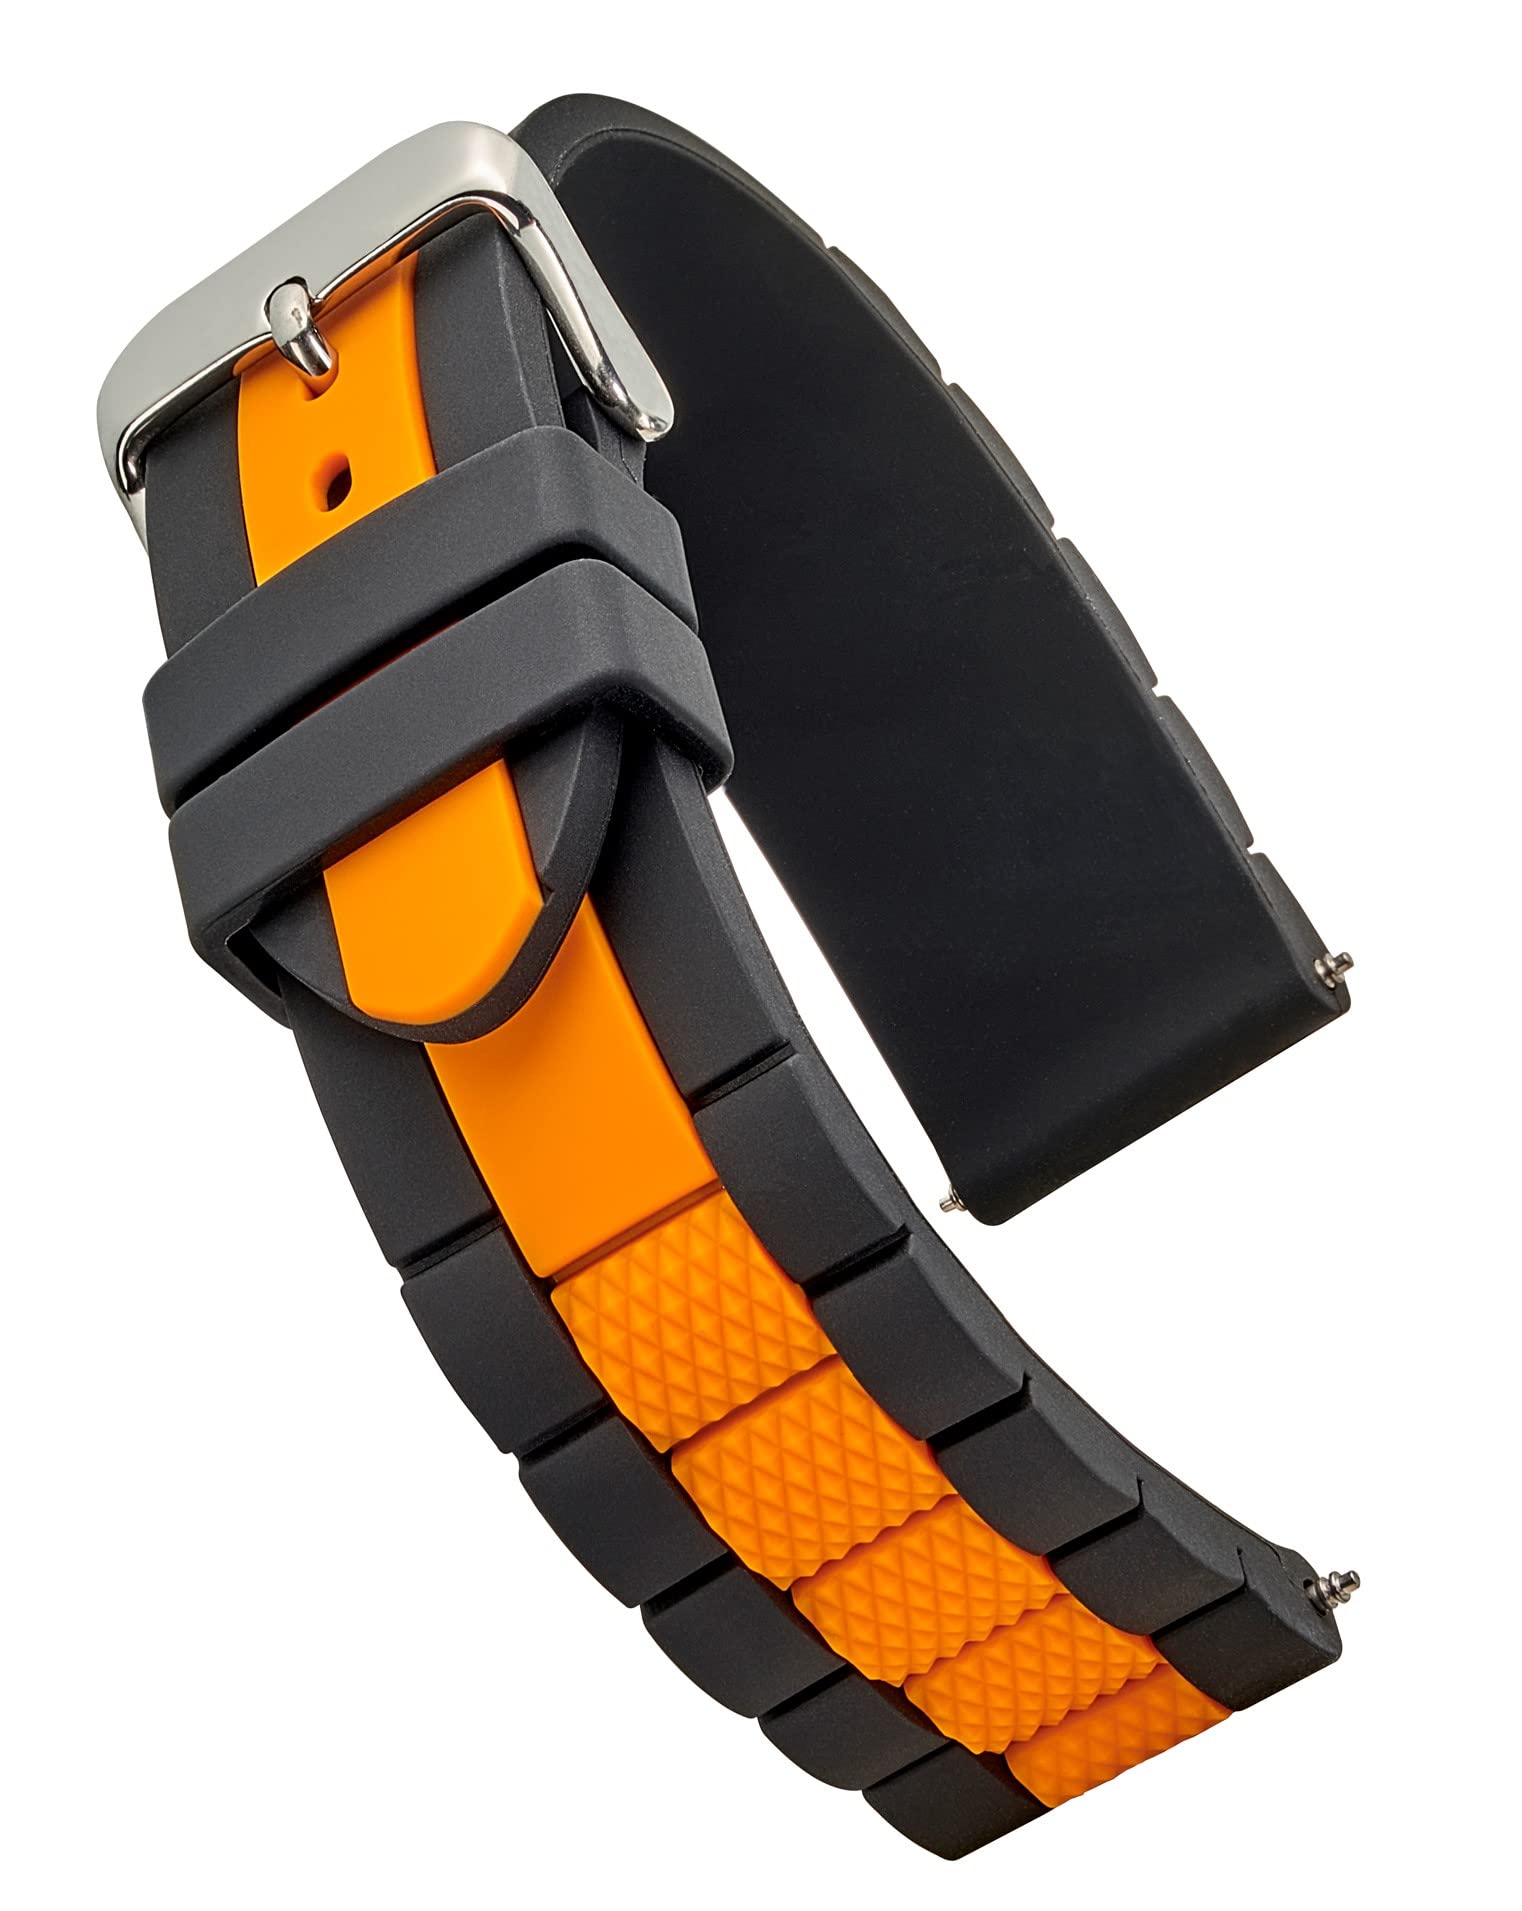 ALPINE Silicone sporty waterproof watch band - Sizes 20mm, 22mm & 24mm